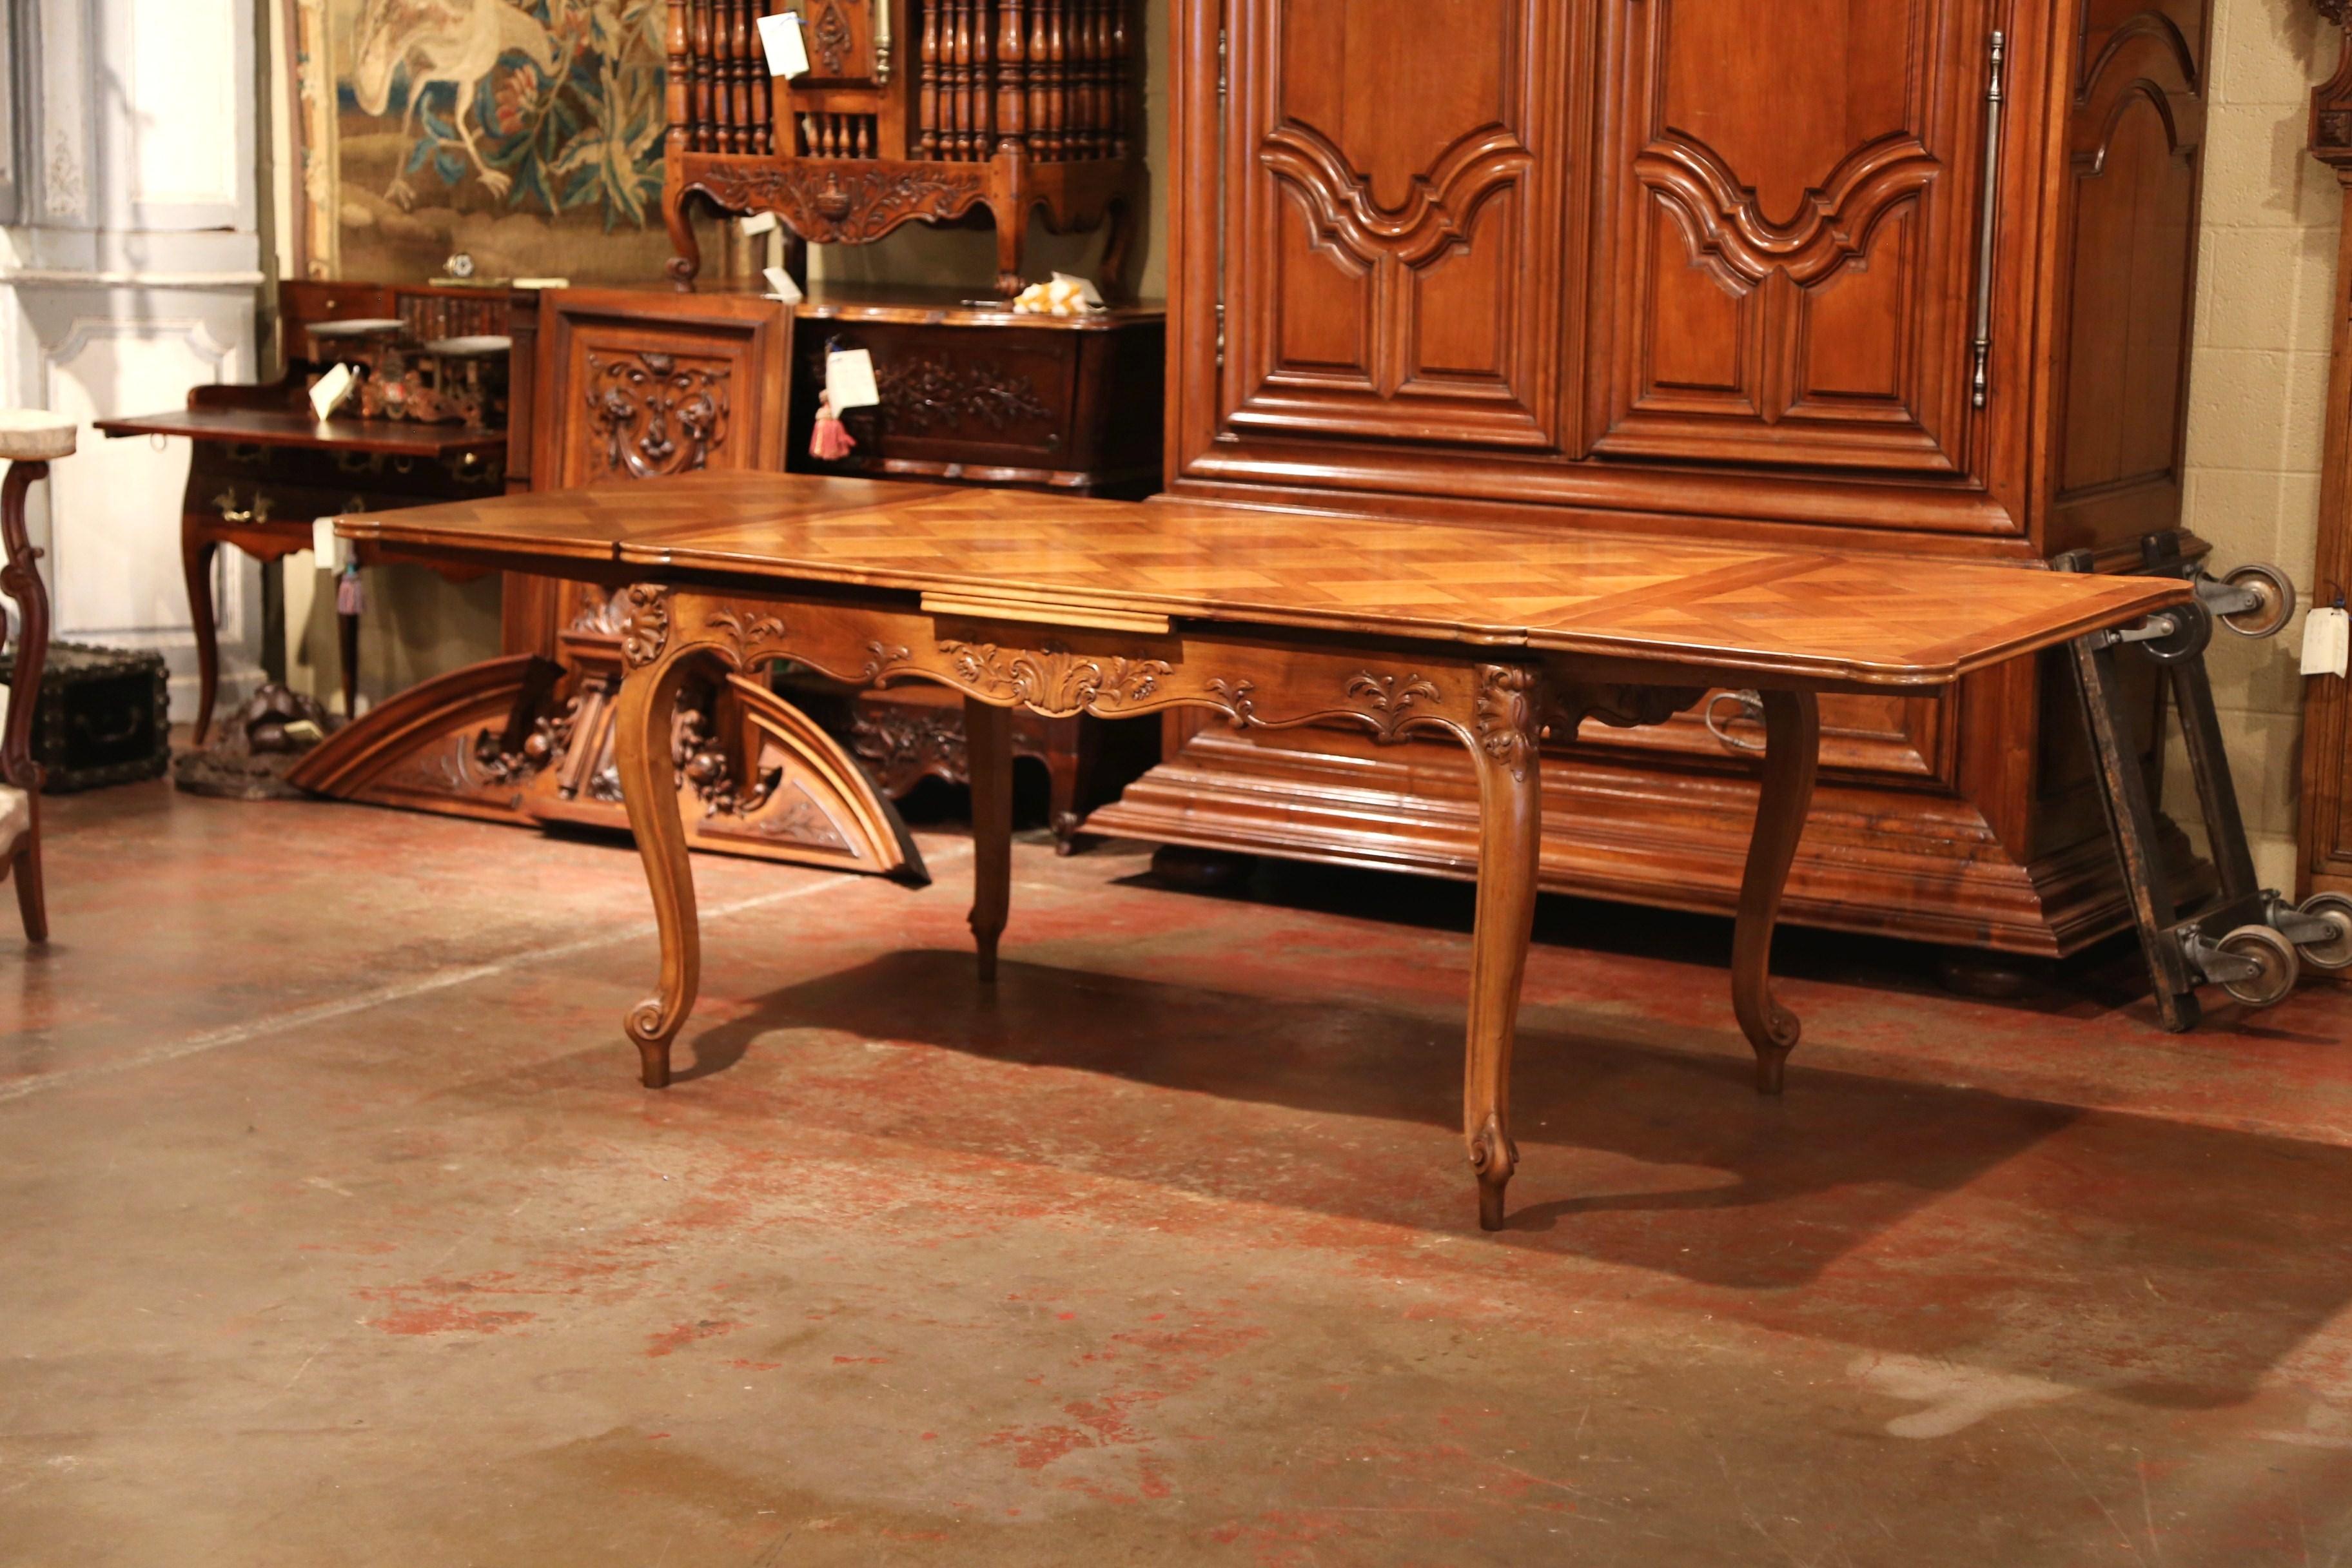 Hand-Carved Mid-20th Century Louis XV Carved Walnut Parquetry Table with Leaves